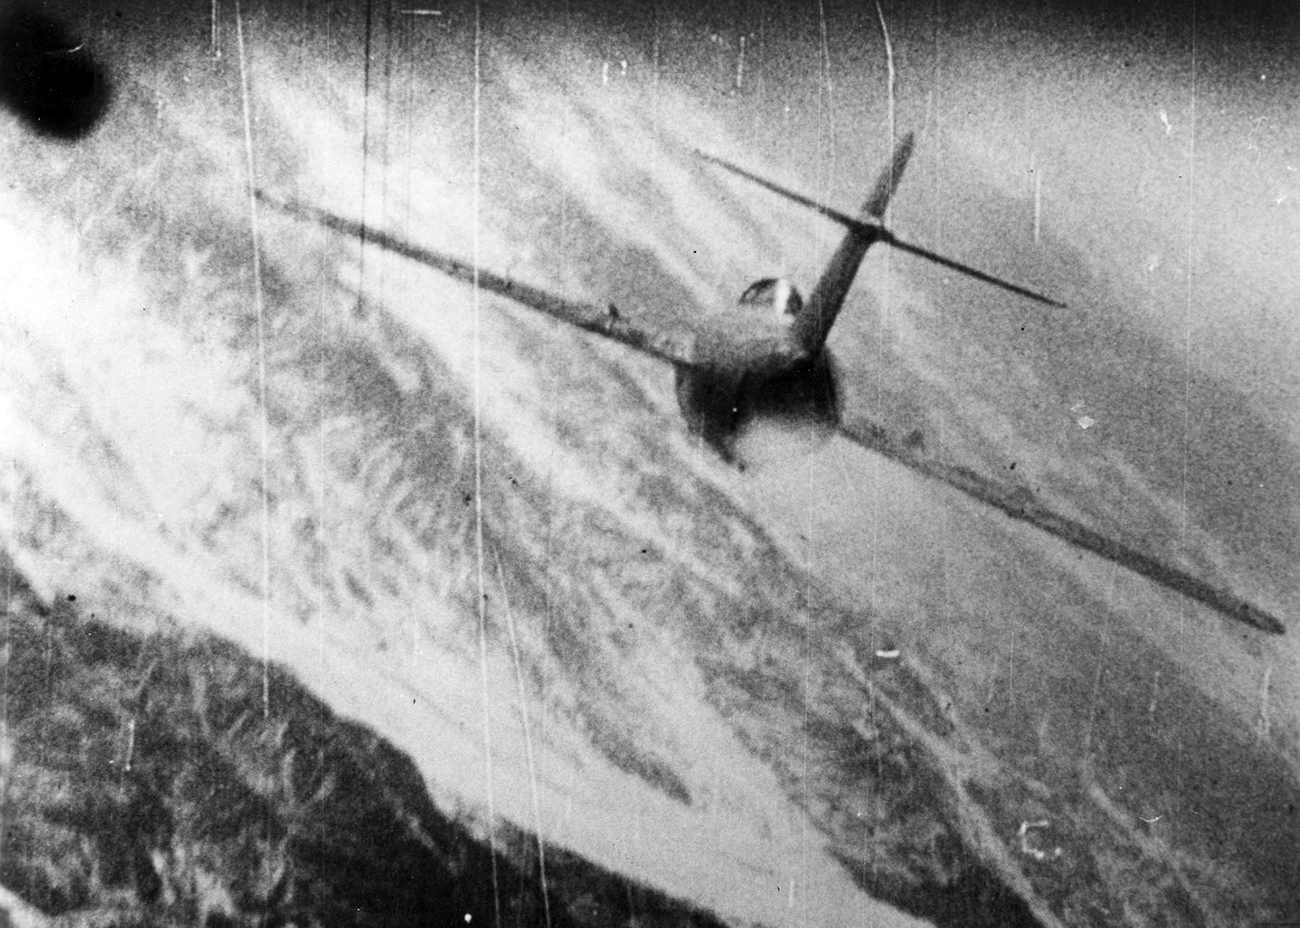 Declassified Soviet archives show a new picture about the air war over Korea in the 1950s.